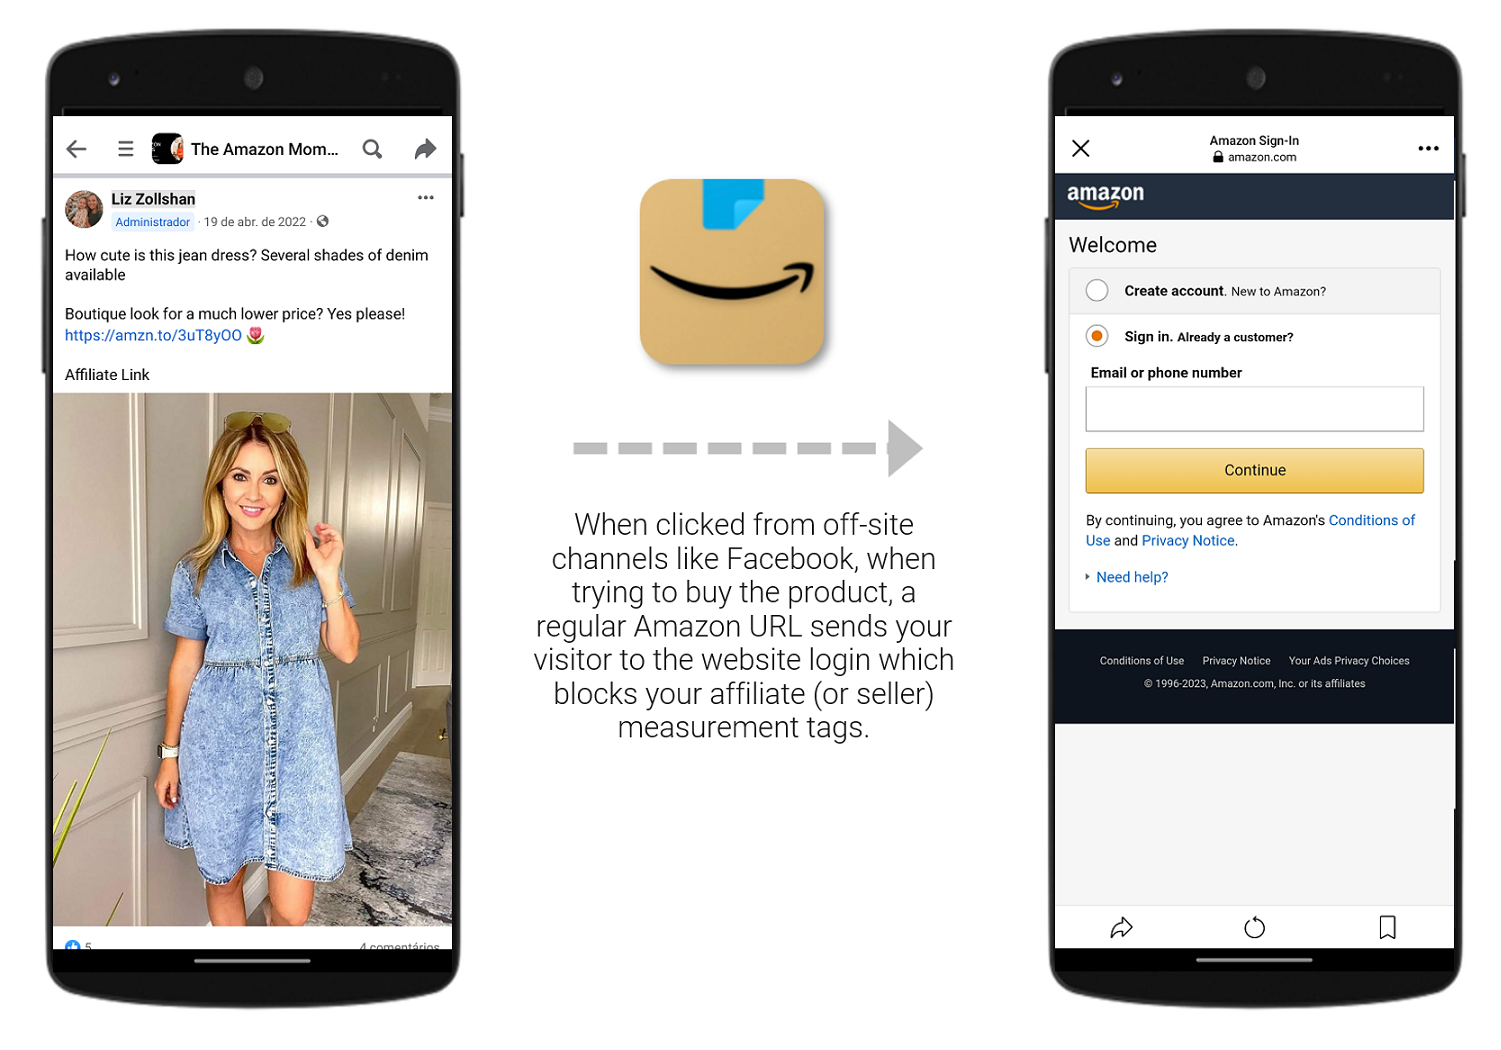 How Amazon Affilifiates and Influencers Can Link into the Amazon App from Facebook Groups to Increase Commisions